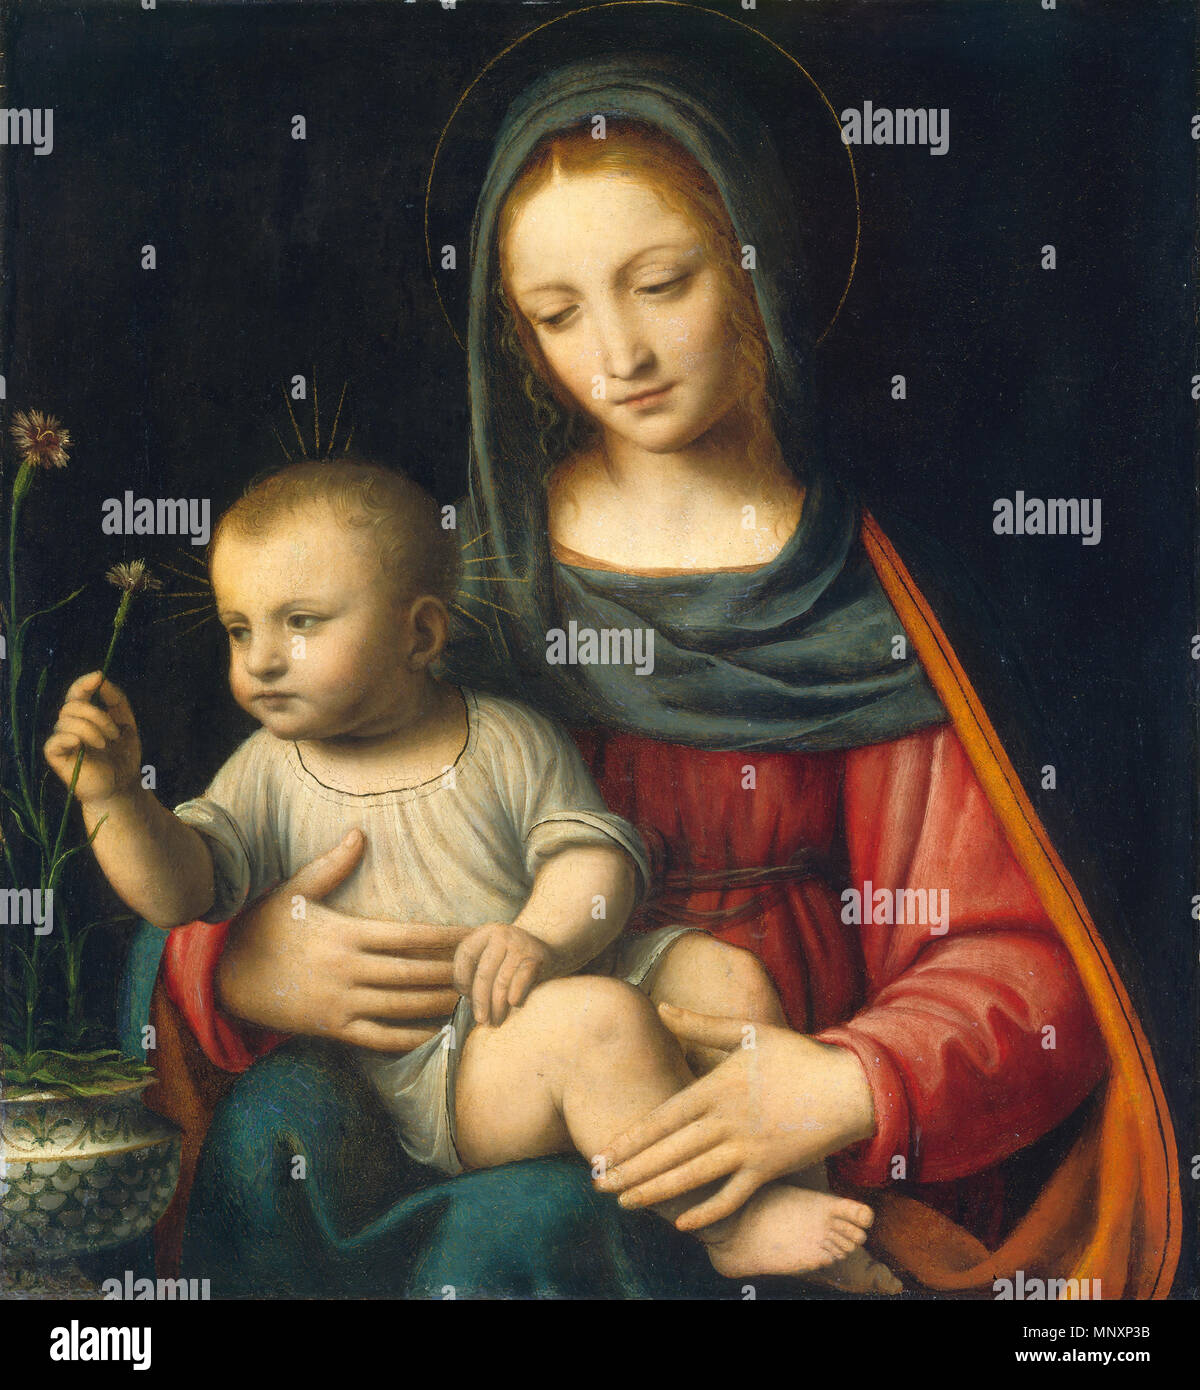 Painting; oil on panel; overall: 43.8 x 40.3 cm (17 1/4 x 15 7/8 in.);   The Madonna of the Carnation   circa 1515.   1177 The Madonna of the Carnation by Bernardino Luini Stock Photo